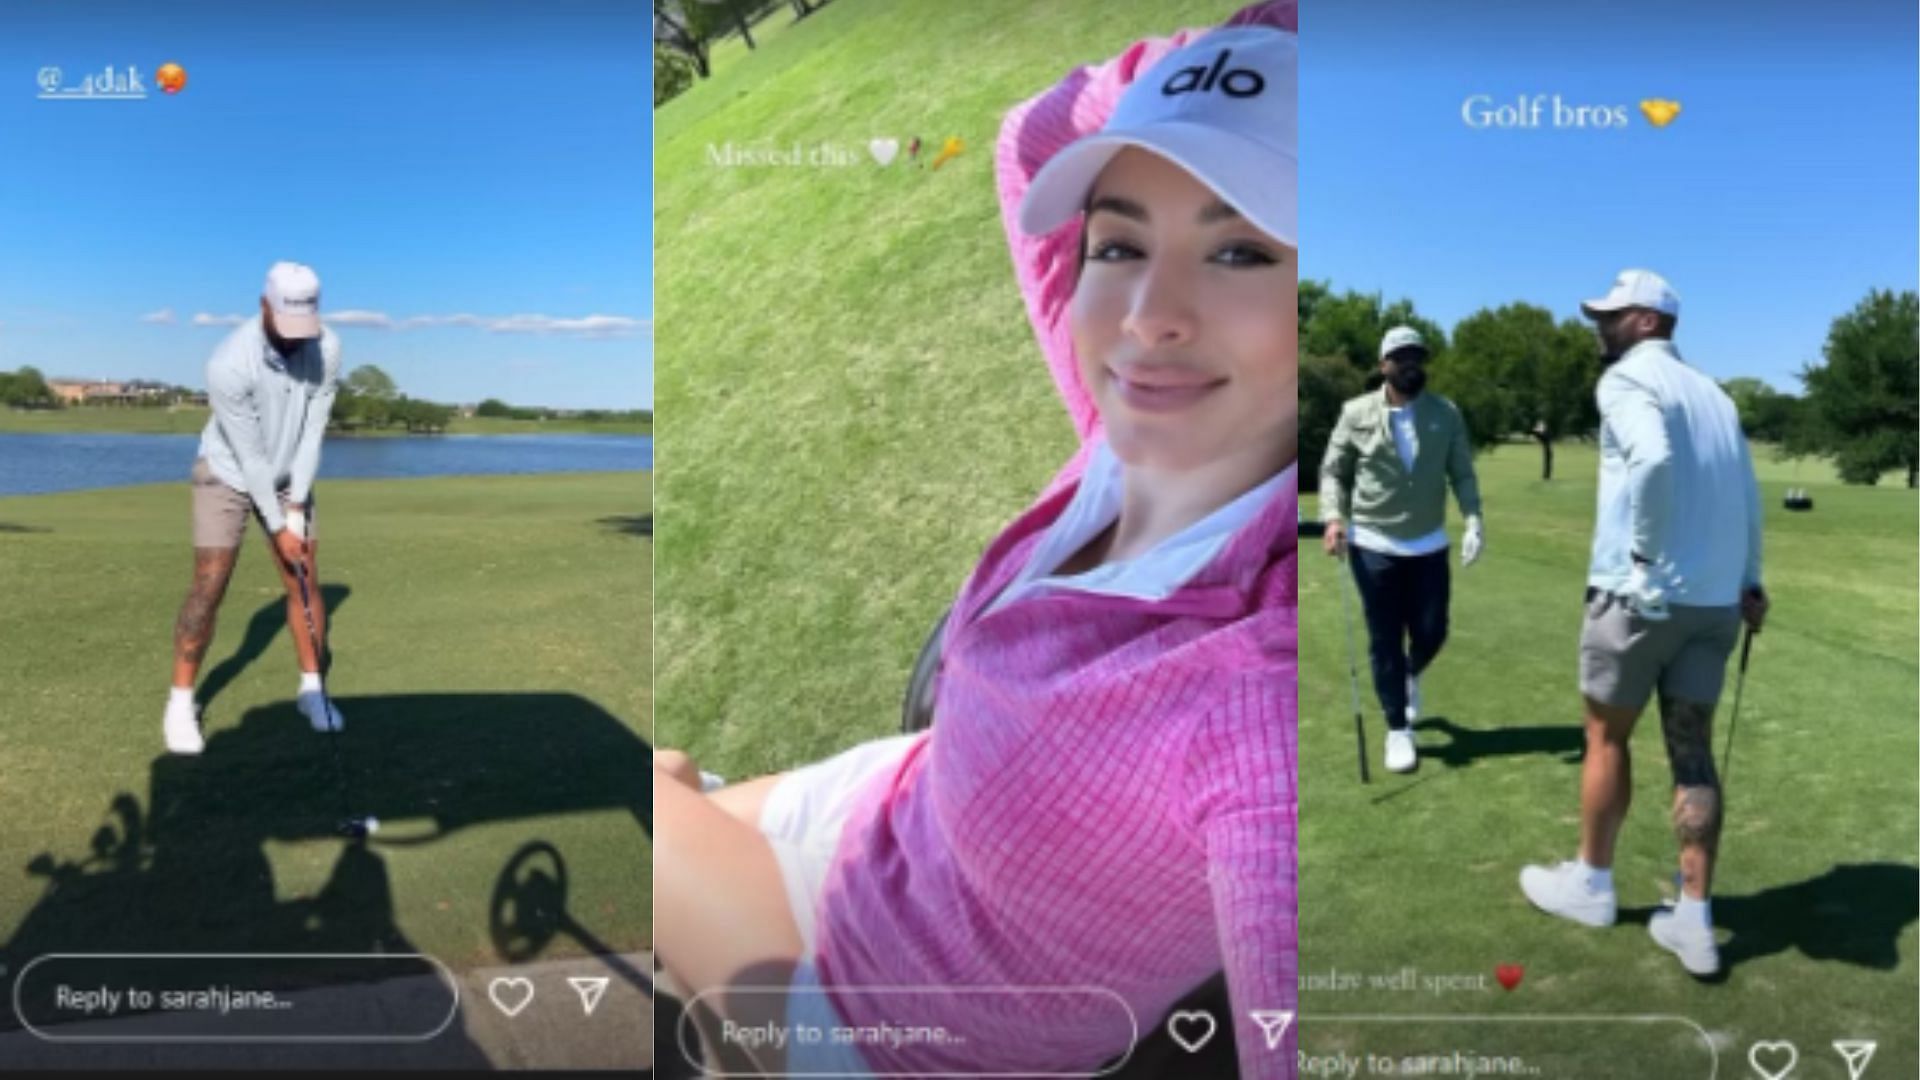 Prescott and his girlfriend, Sarah Jane Ramos, spent last weekend at the golf course.